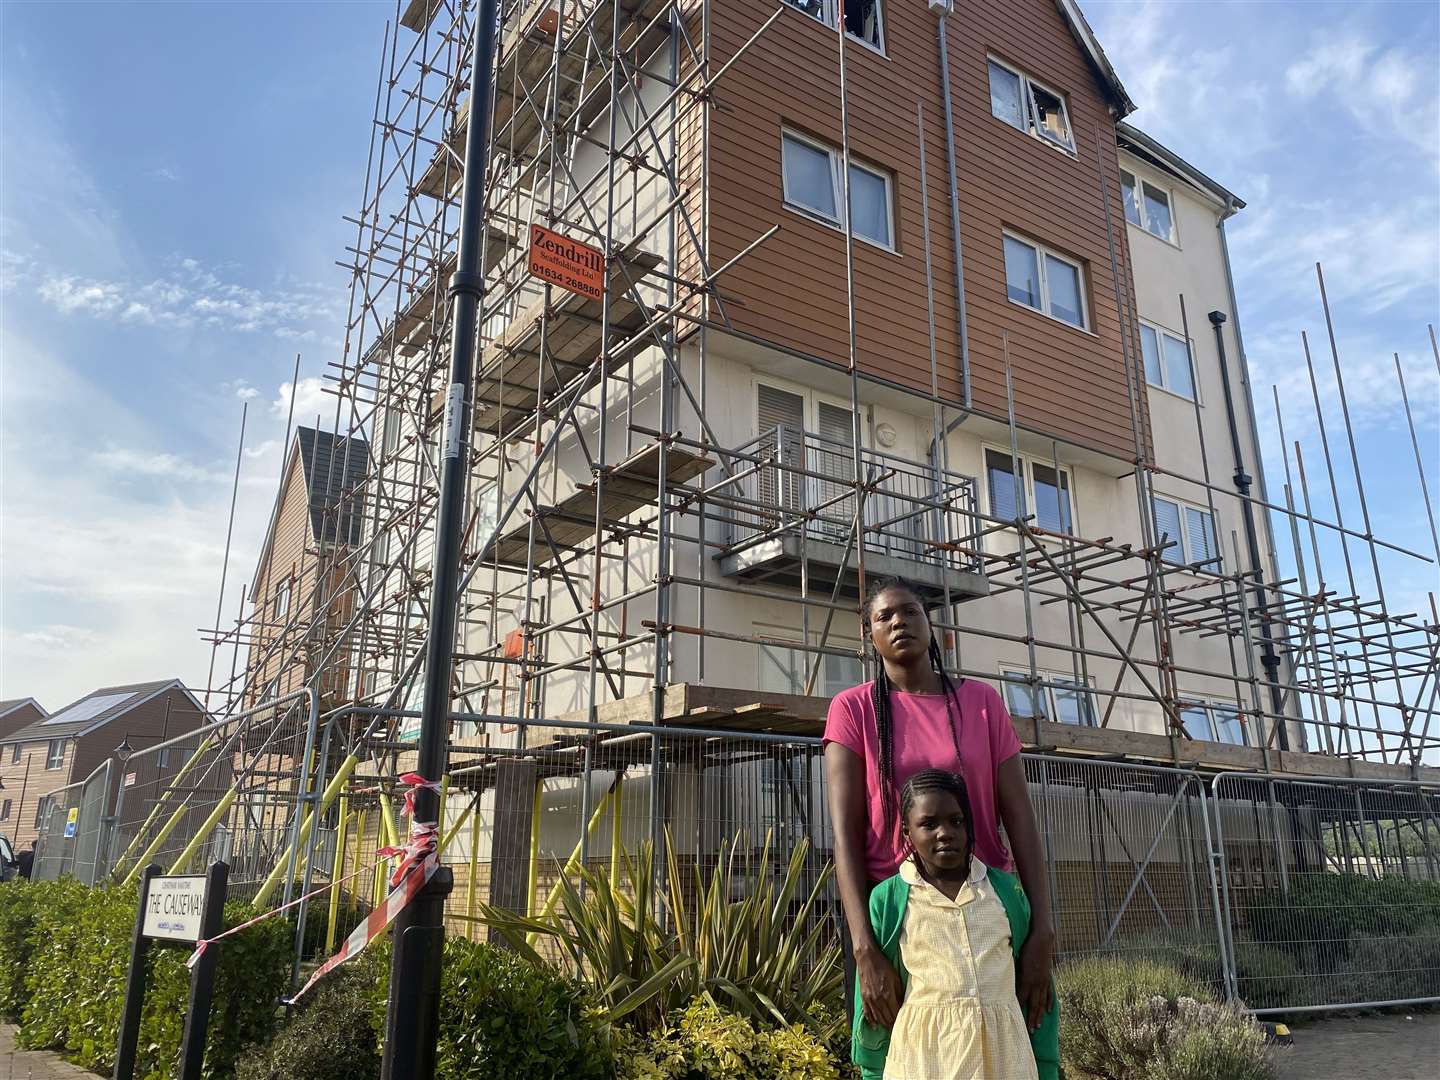 Naomi Nwagbara and daughter Elizabeth Ige, 6, who have been made homeless following the devastating fire on St Mary's Island